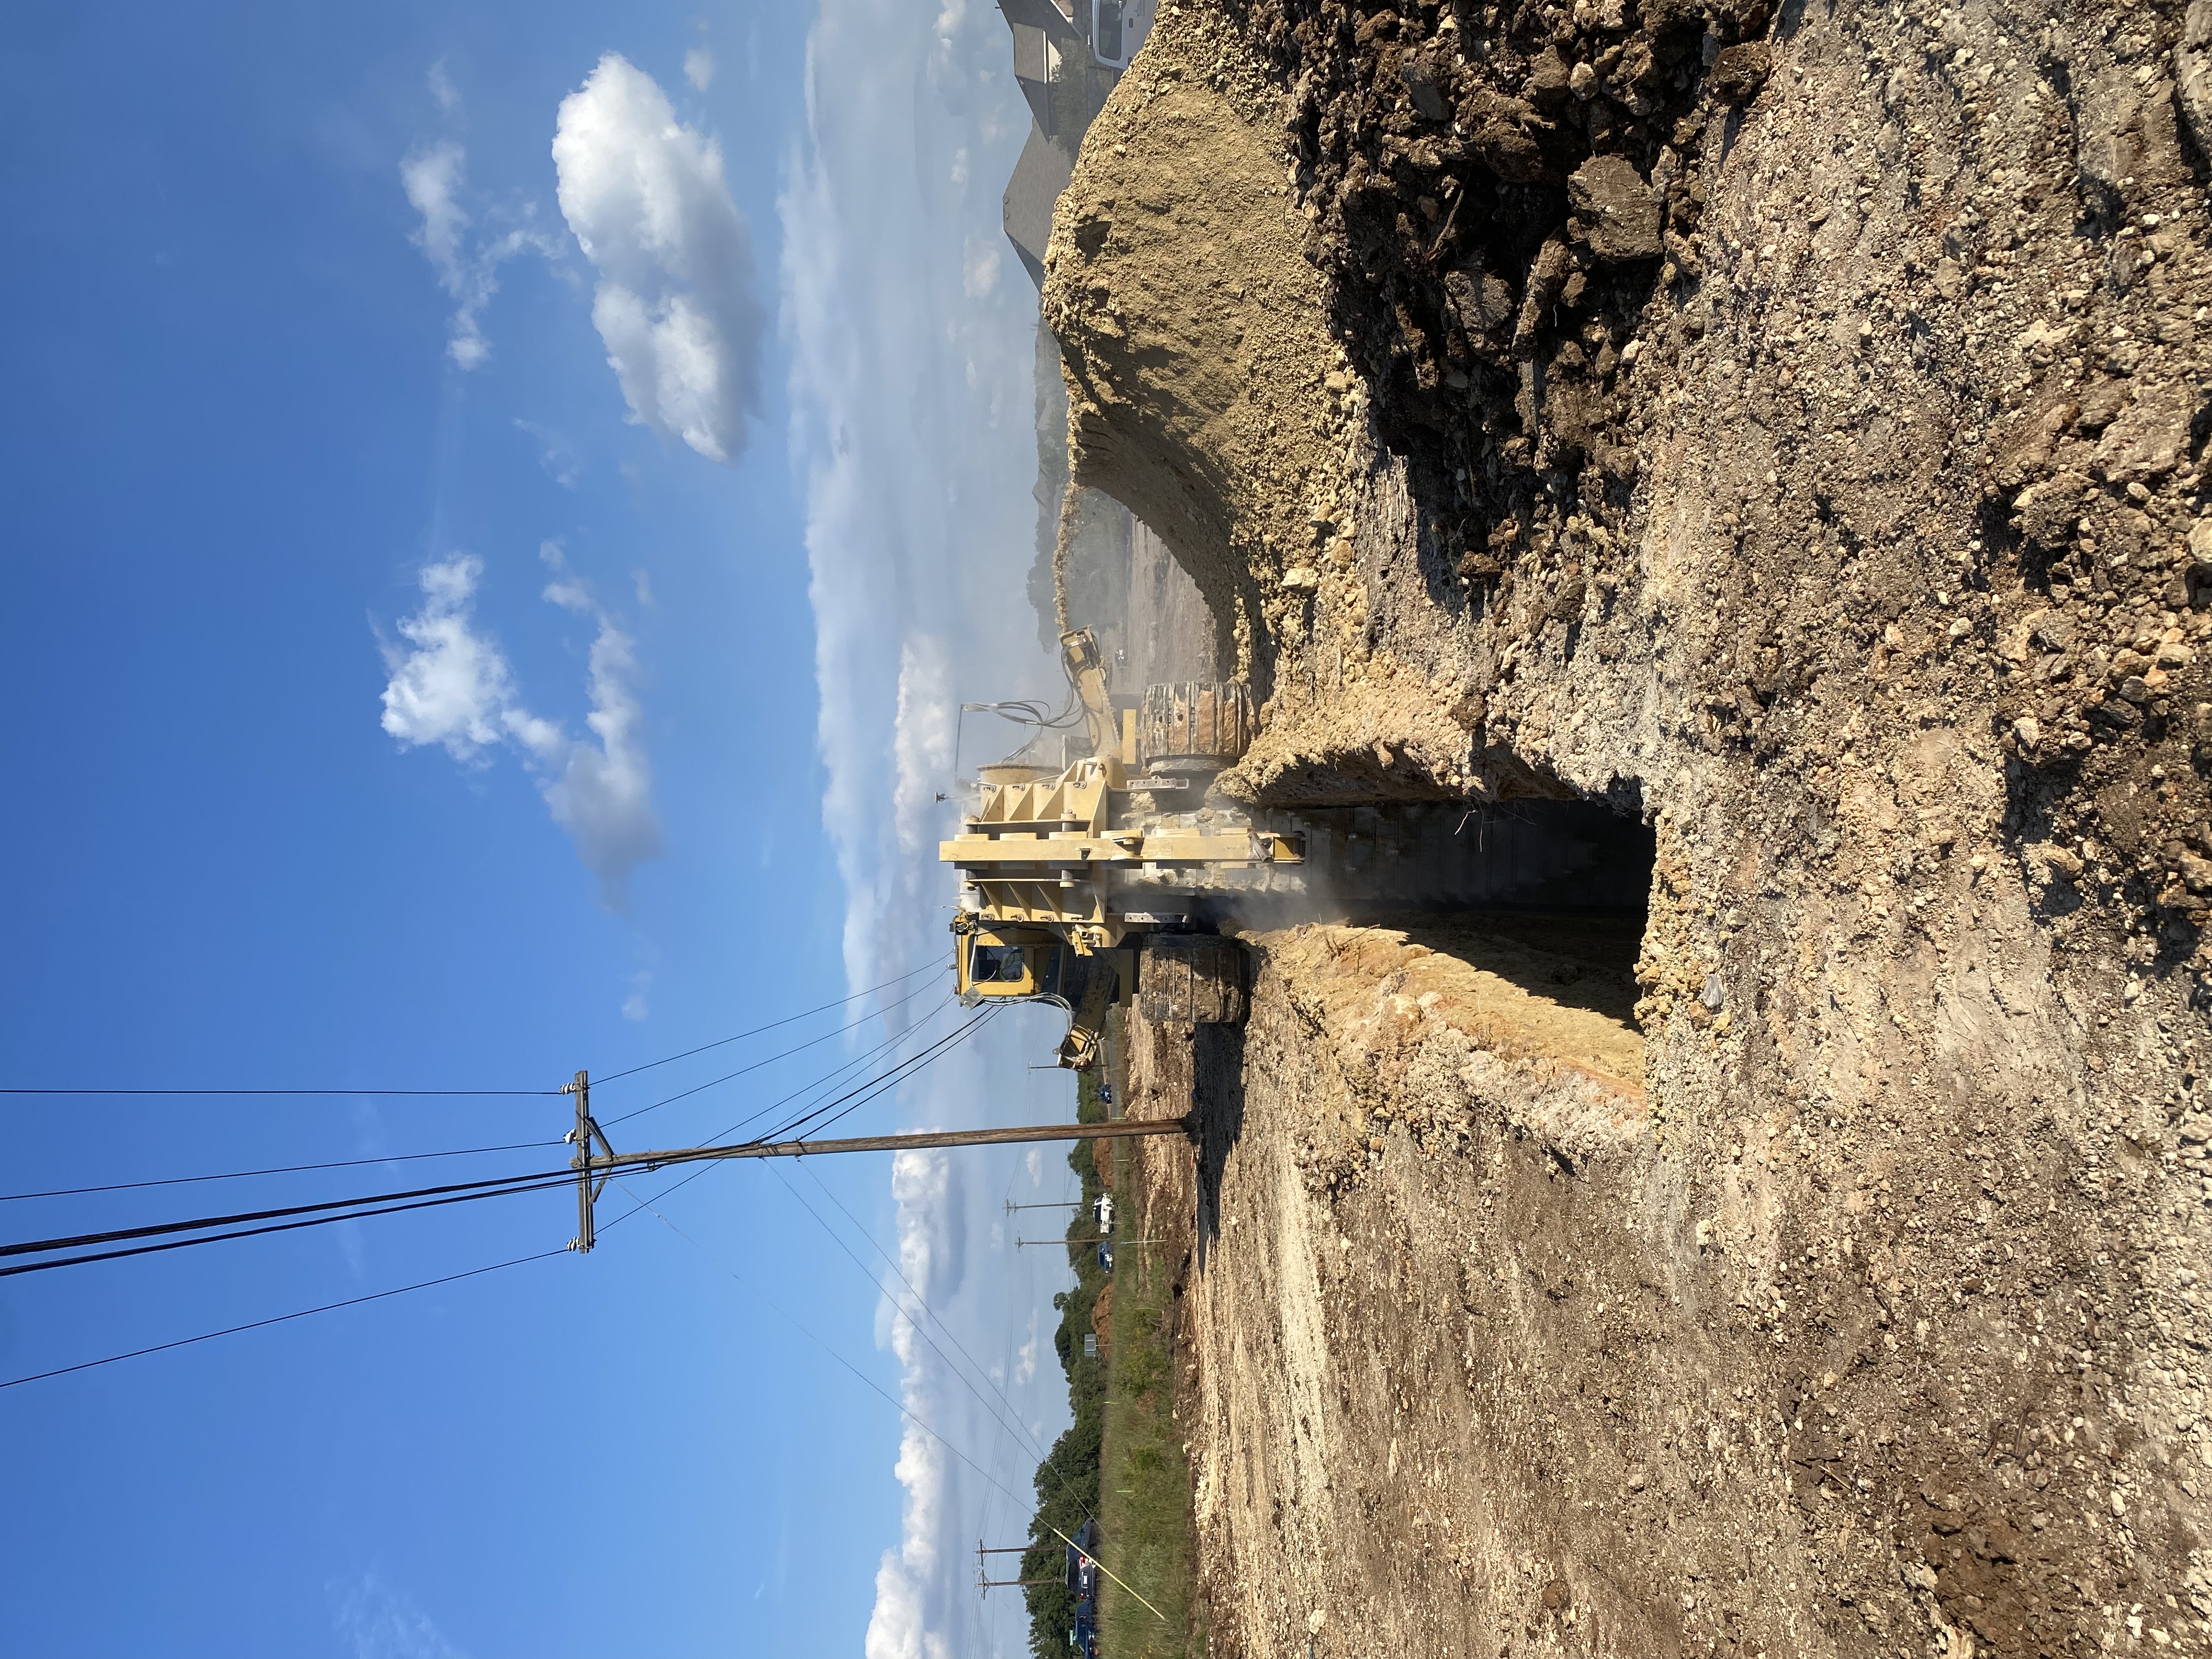 The team uses trenchers during utility relocations to install new pipes and lines underground. This trench being cut near South View Road will be used for a new City of Austin water line. November 2021